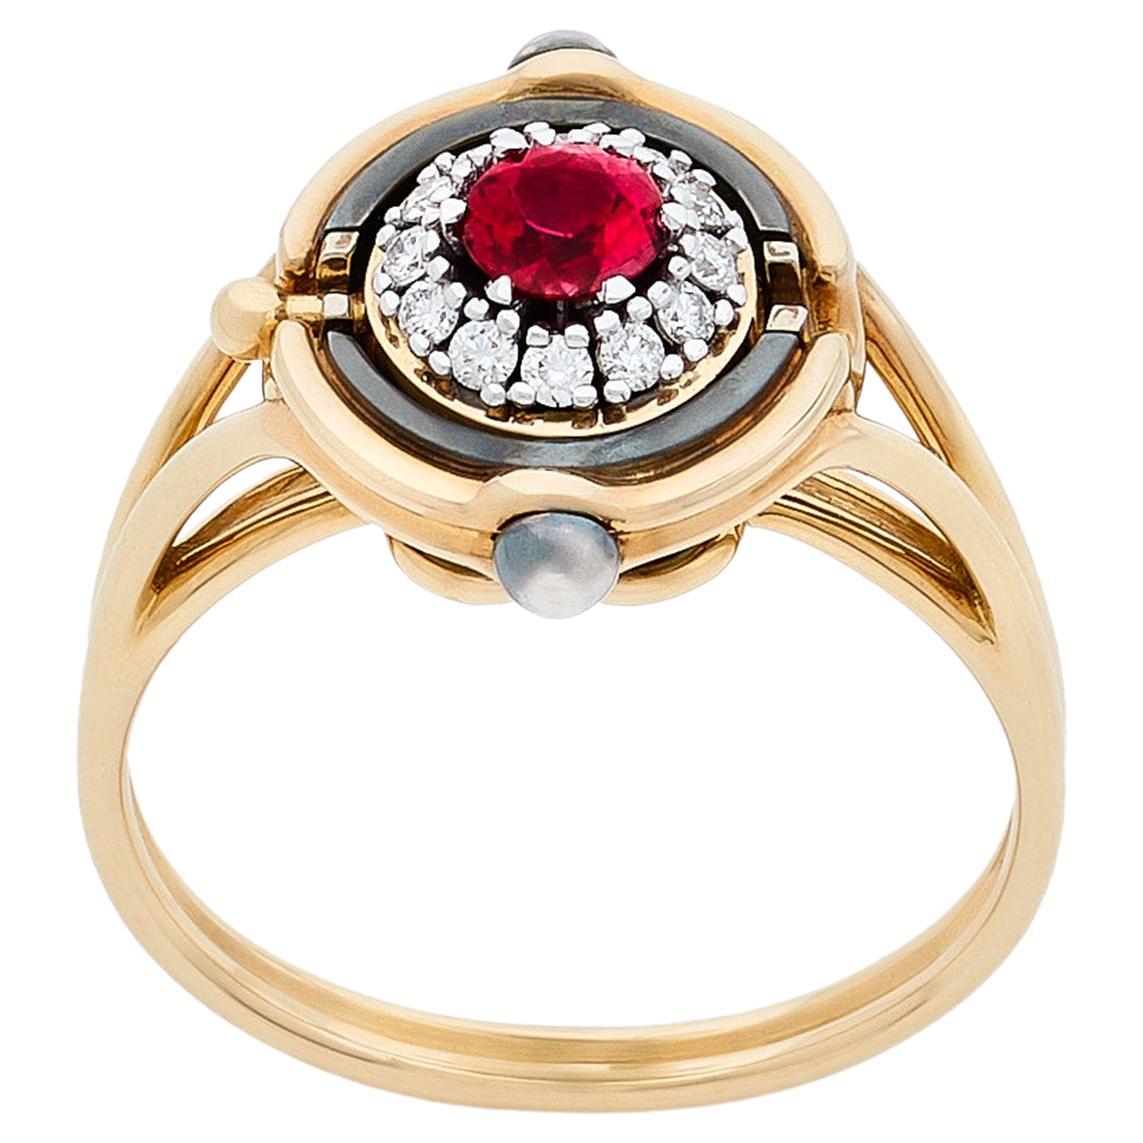 Mira Ruby & Diamond Ring in 18k Yellow Gold by Elie Top